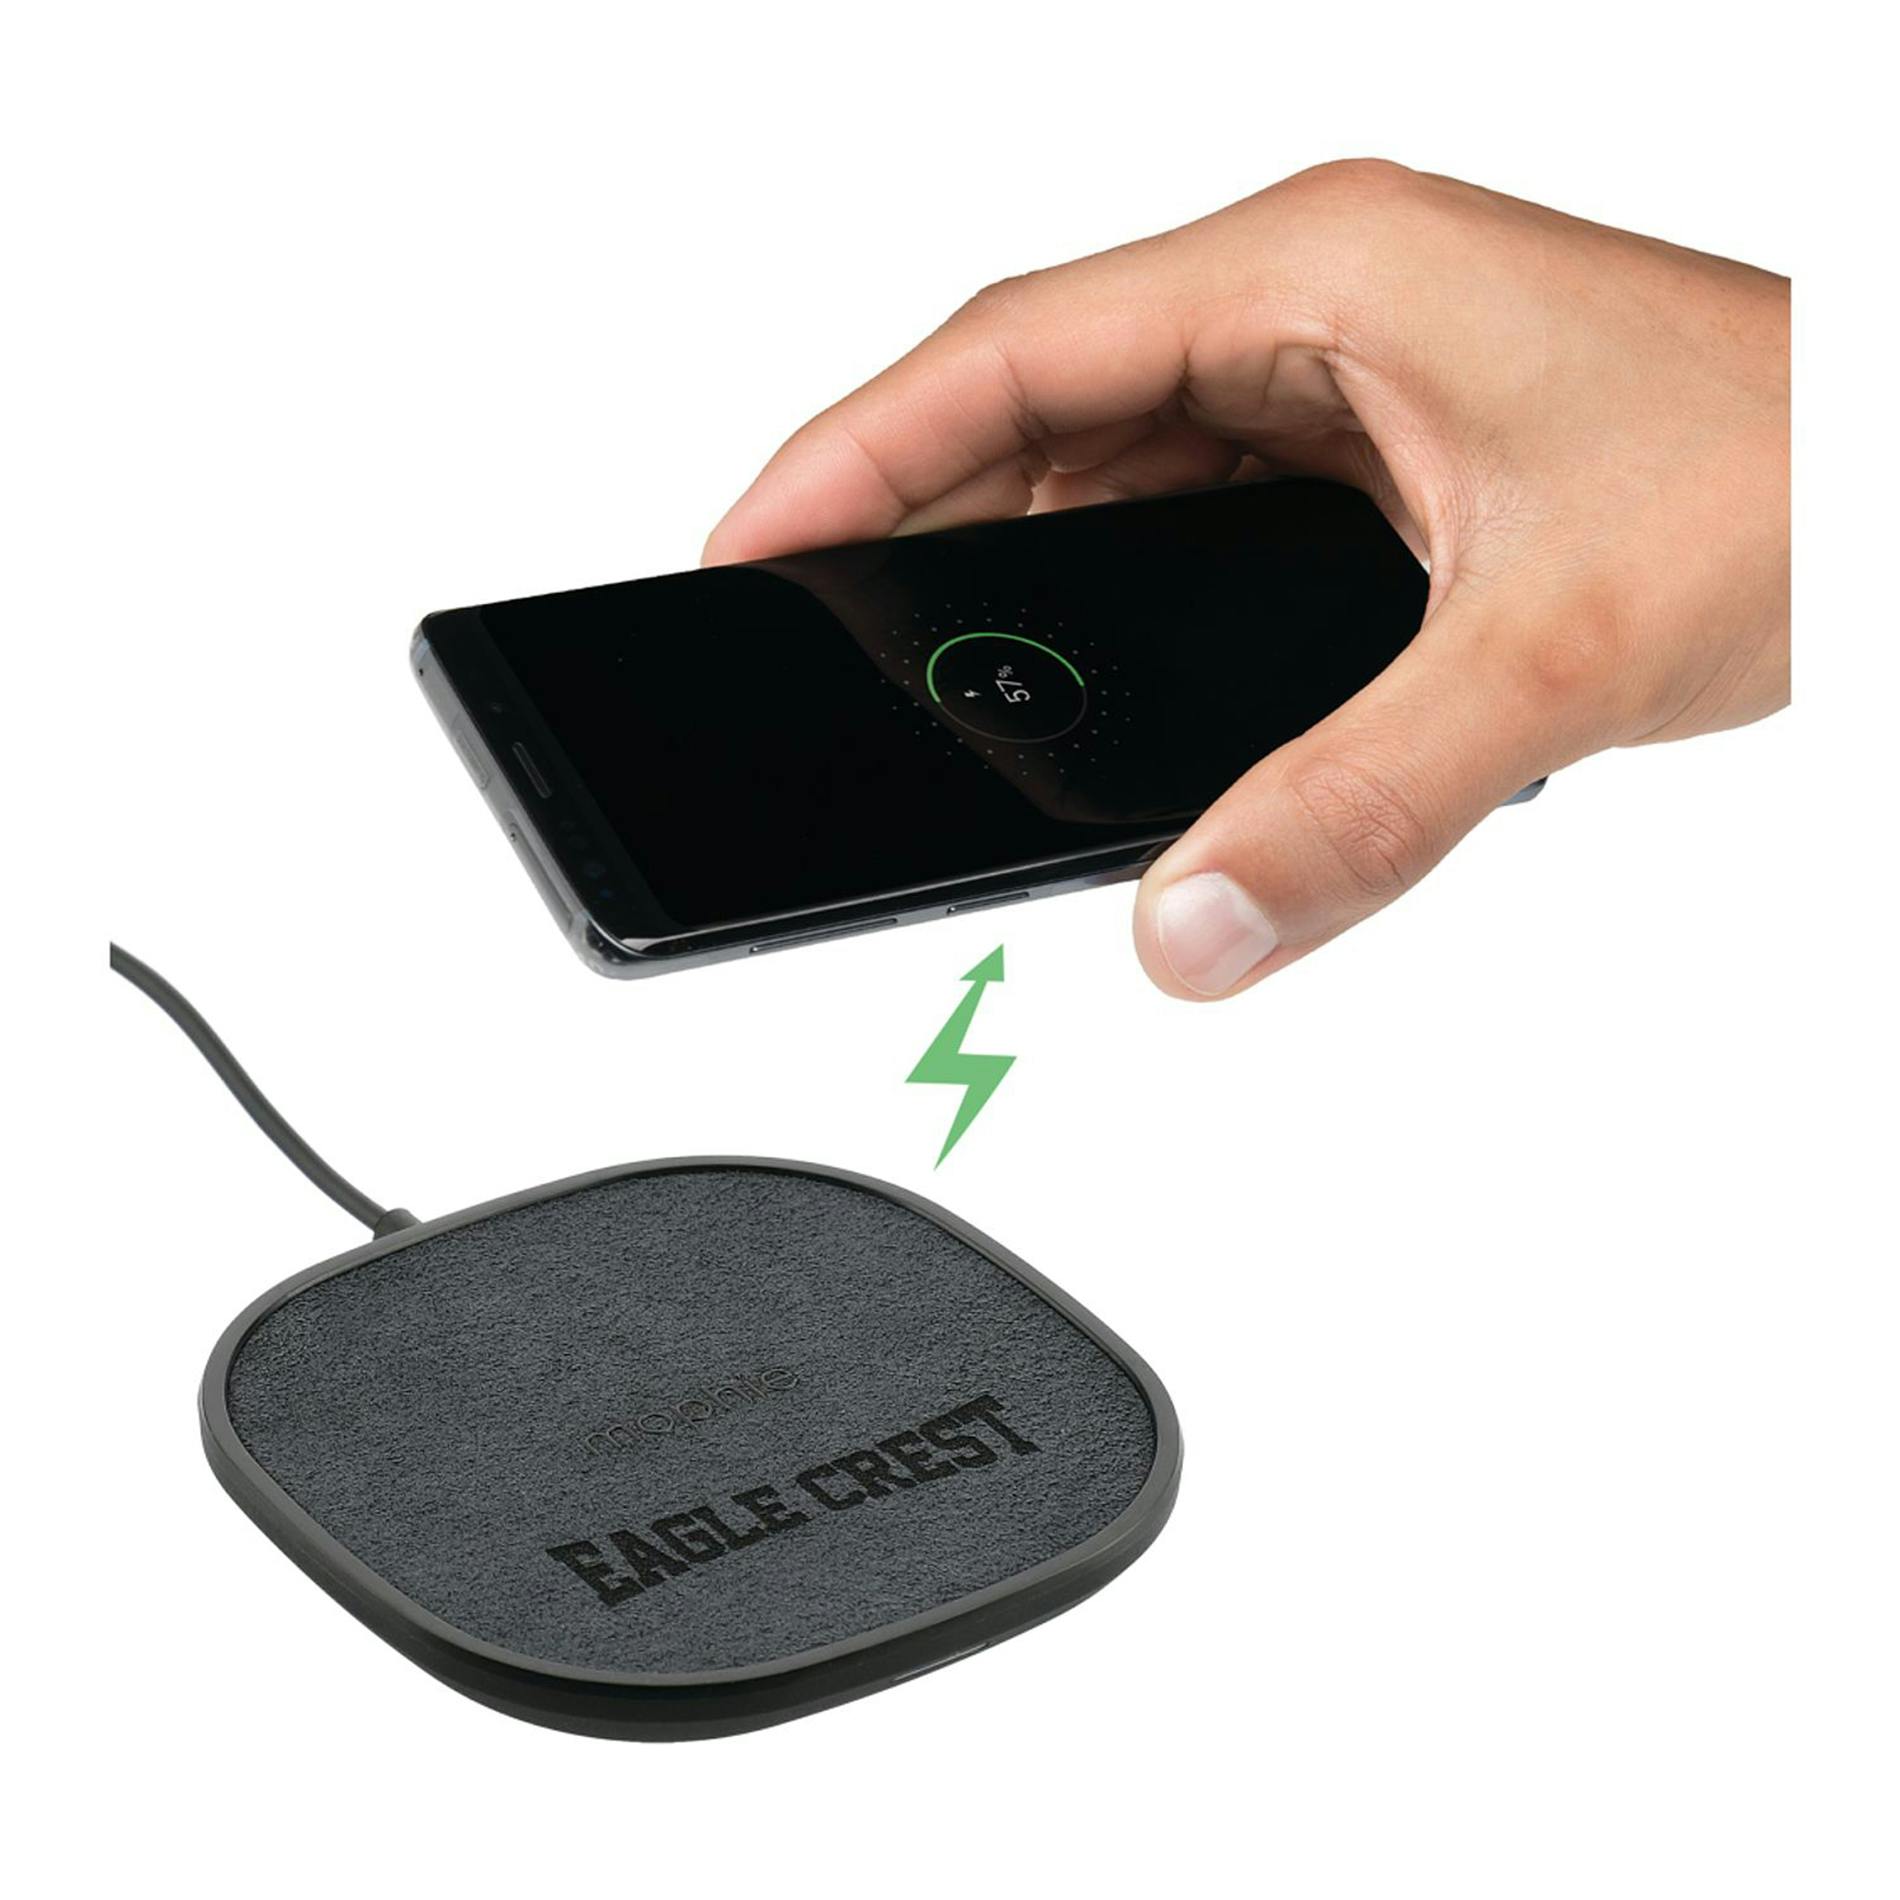 mophie® 15W Wireless Charging Pad - additional Image 4